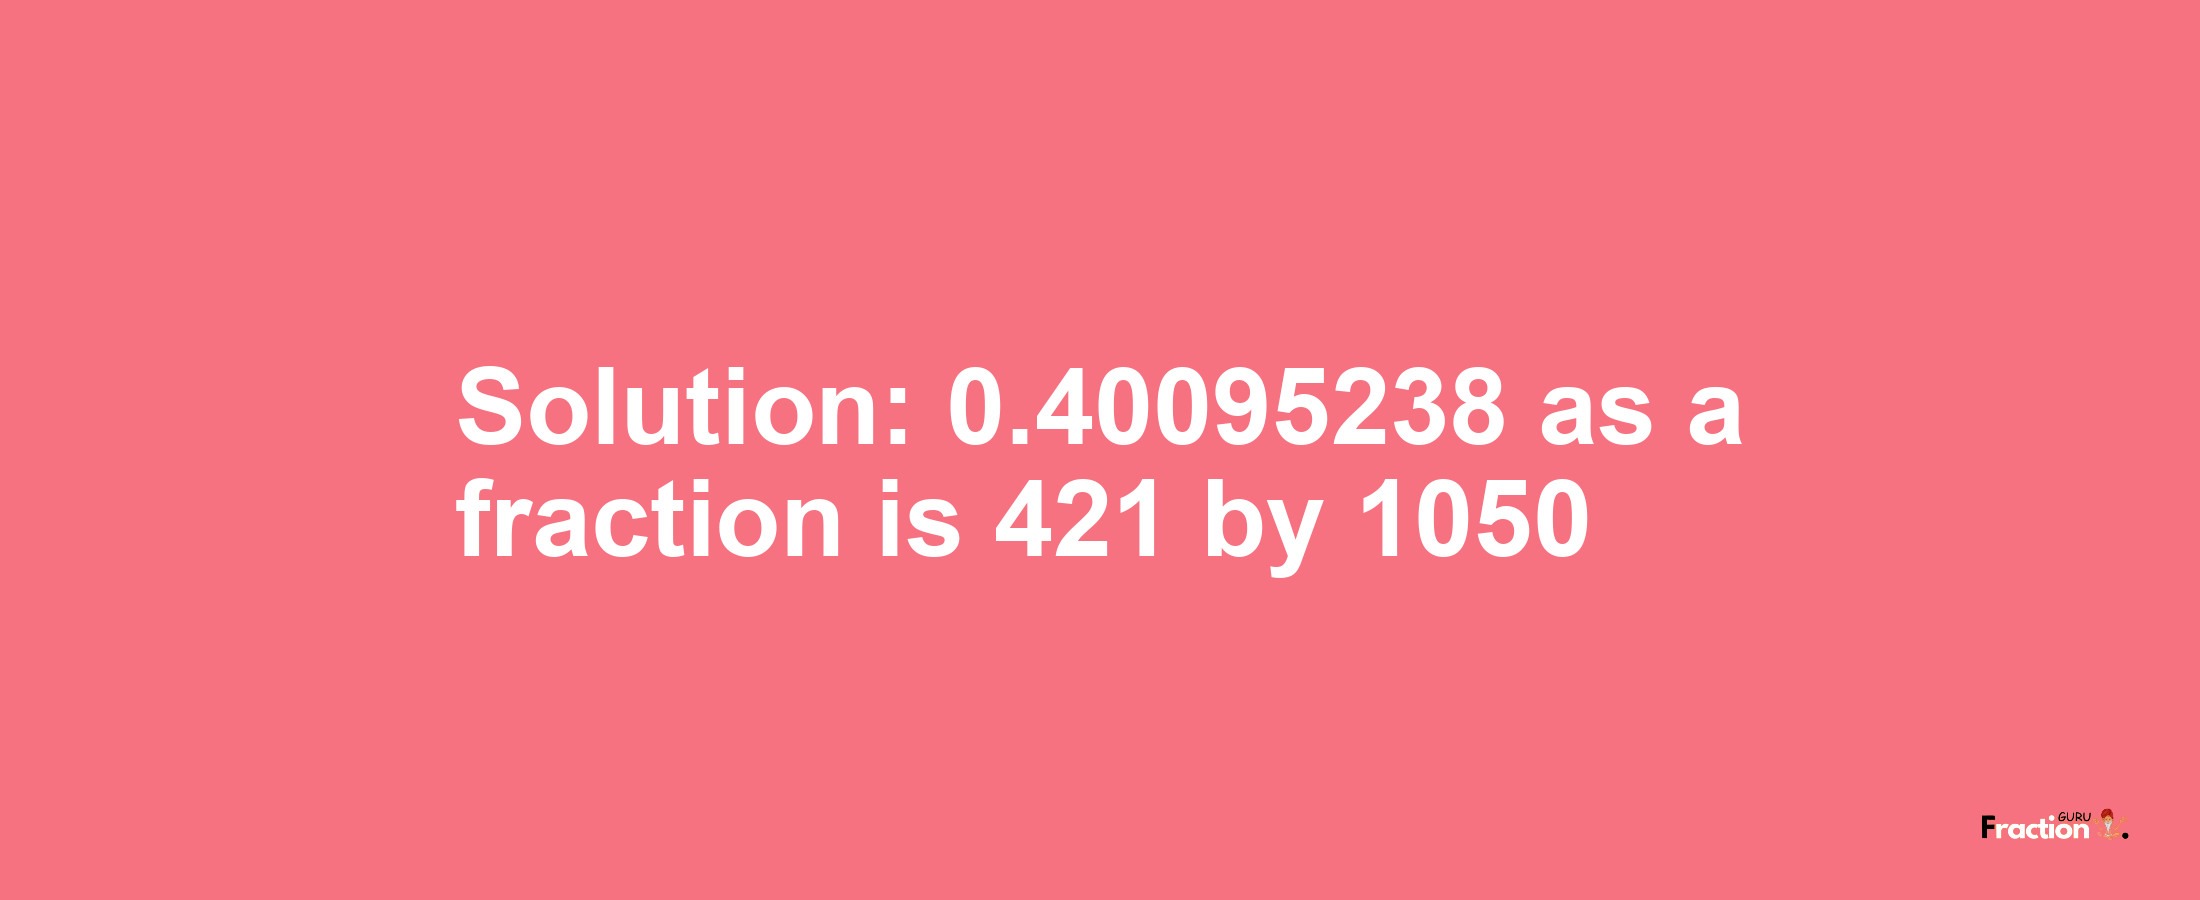 Solution:0.40095238 as a fraction is 421/1050